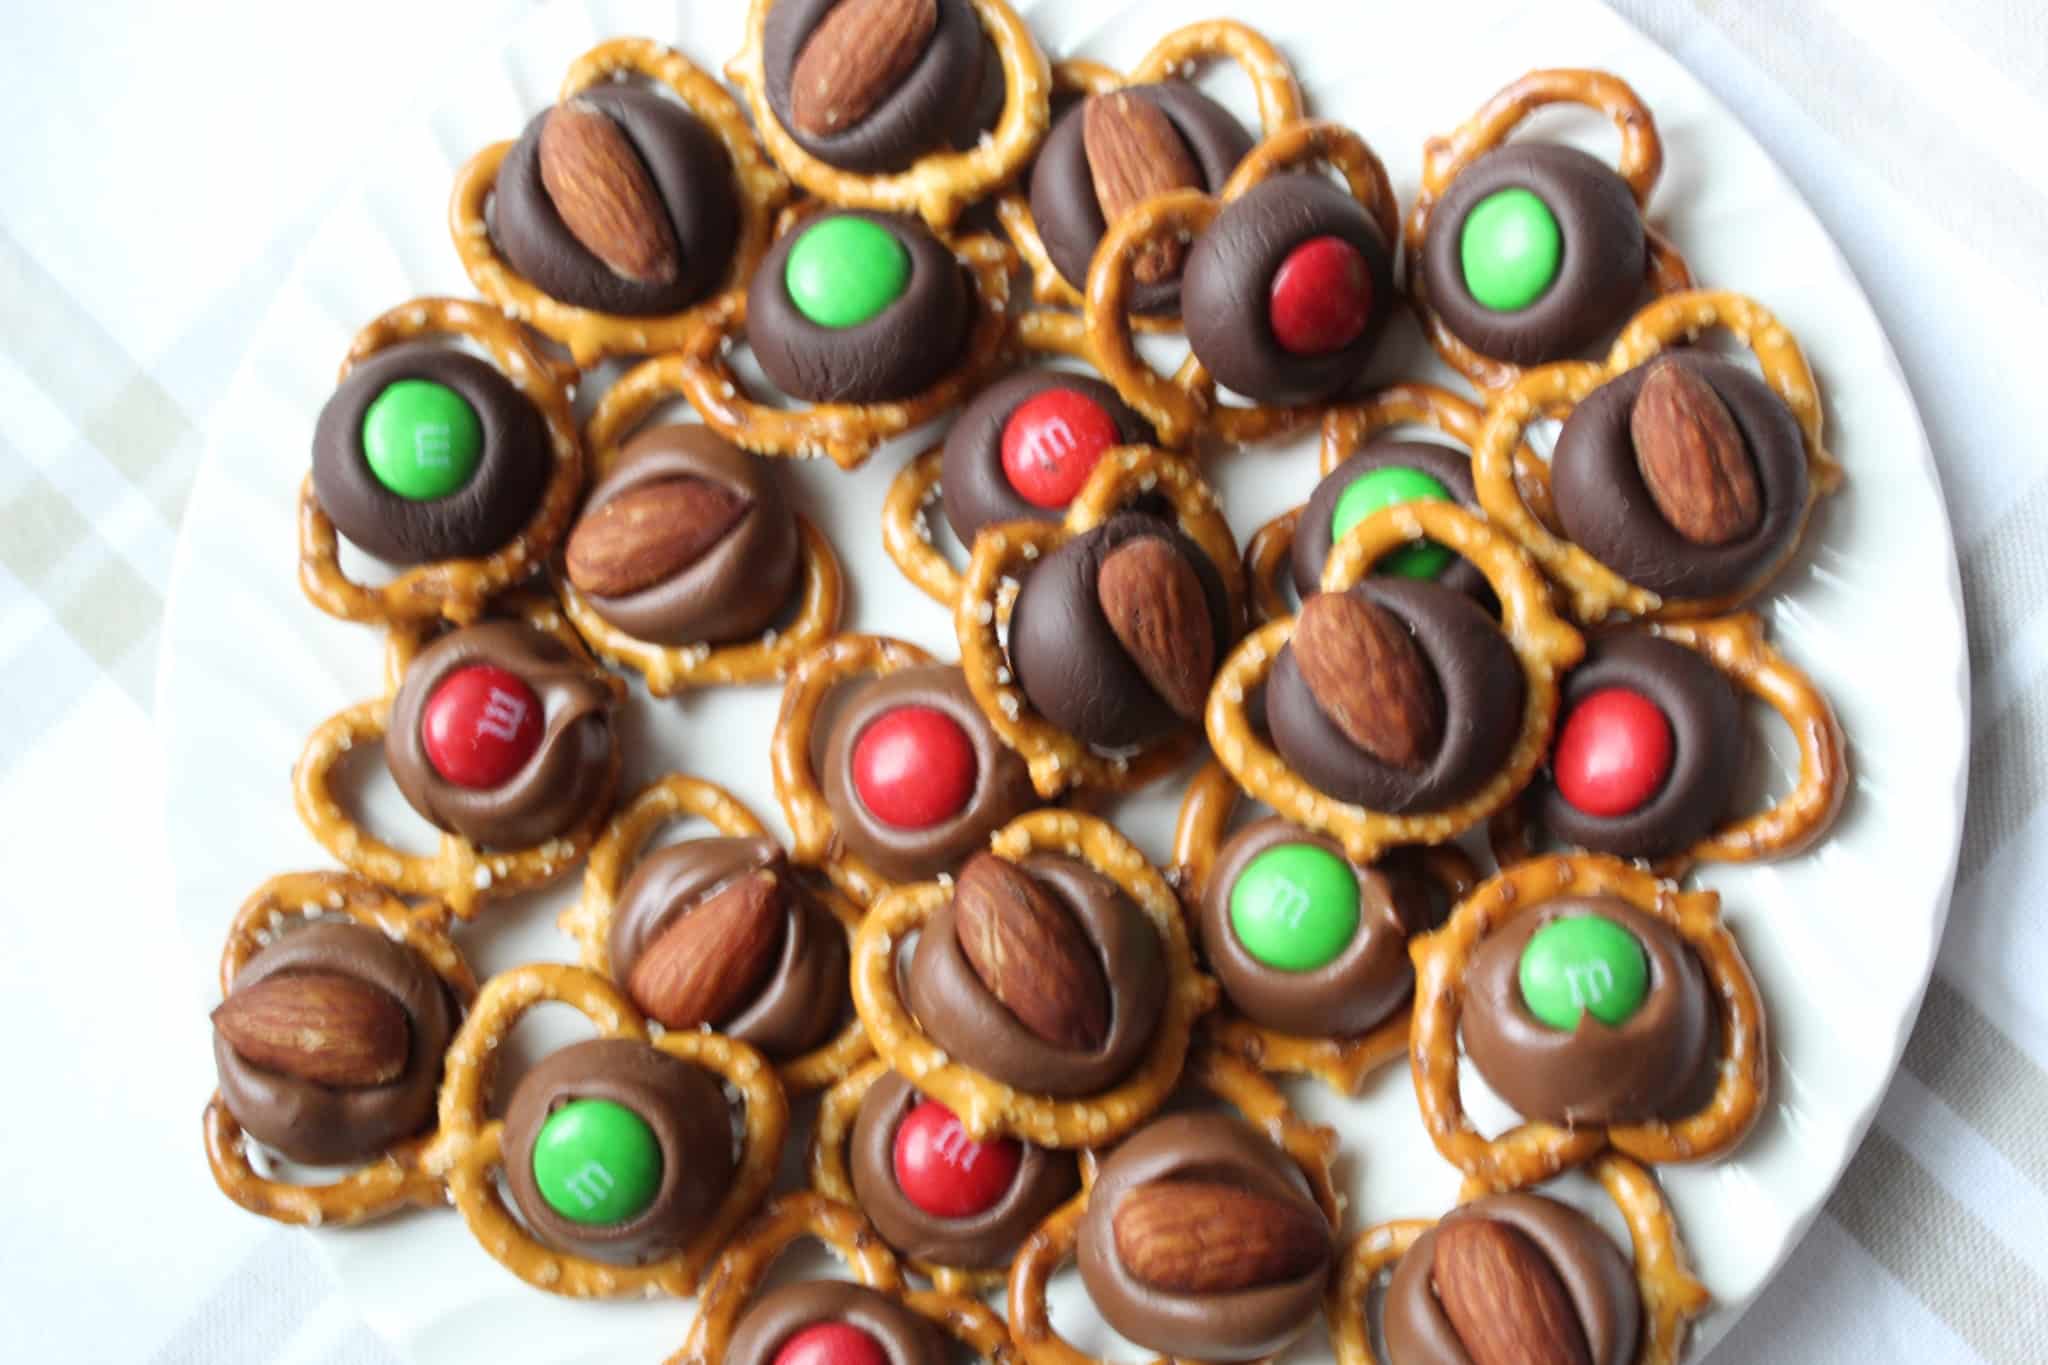 M&M's and almonds on hershey kisses melted onto pretzels